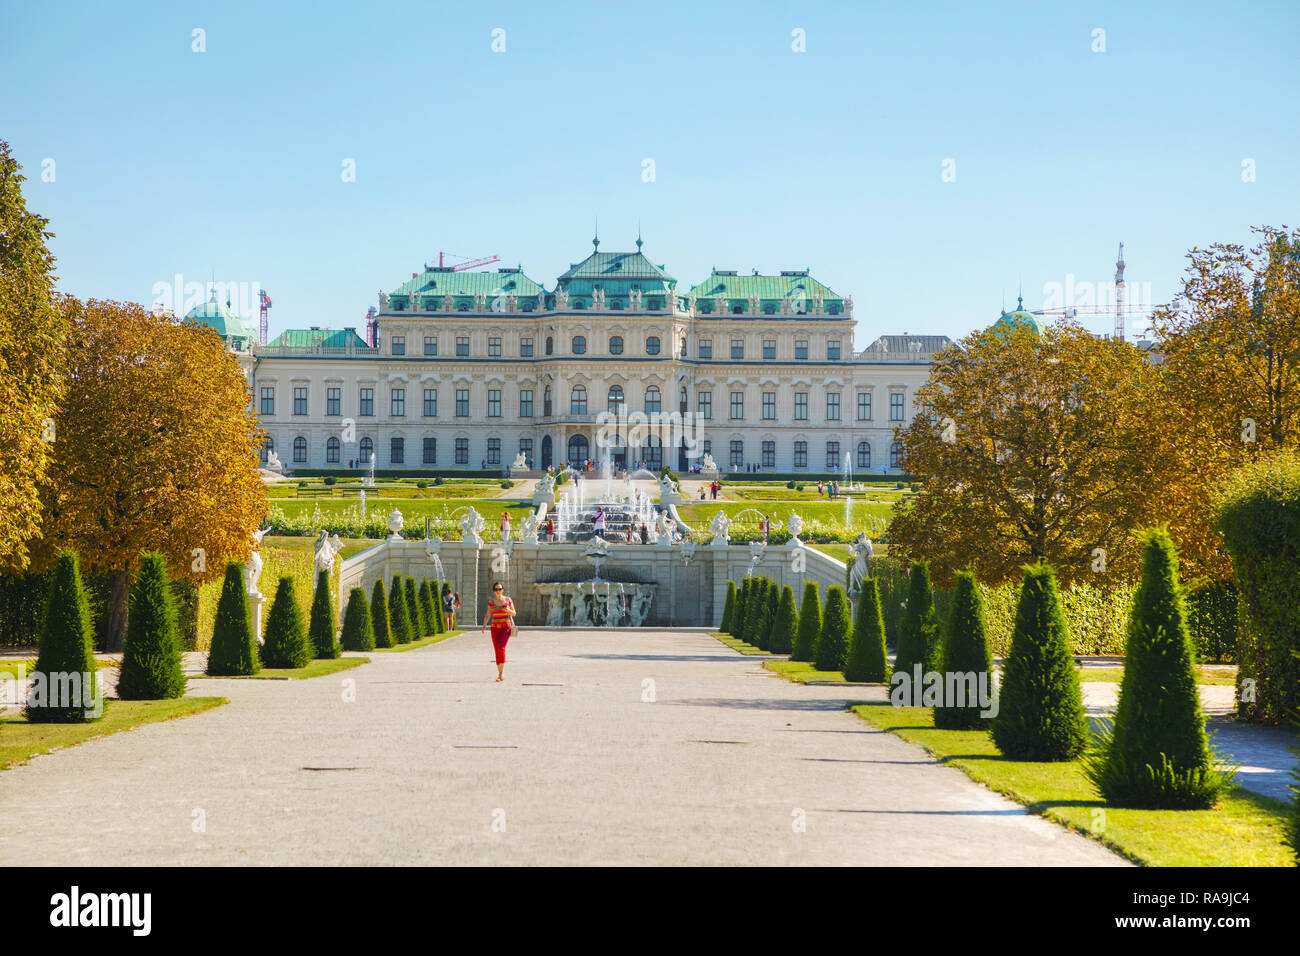 VIENNA - AUGUST 30: Belvedere palace on August 30, 2017 in Vienna, Austria. It's a historic building complex, consisting of two Baroque palaces, the O Stock Photo